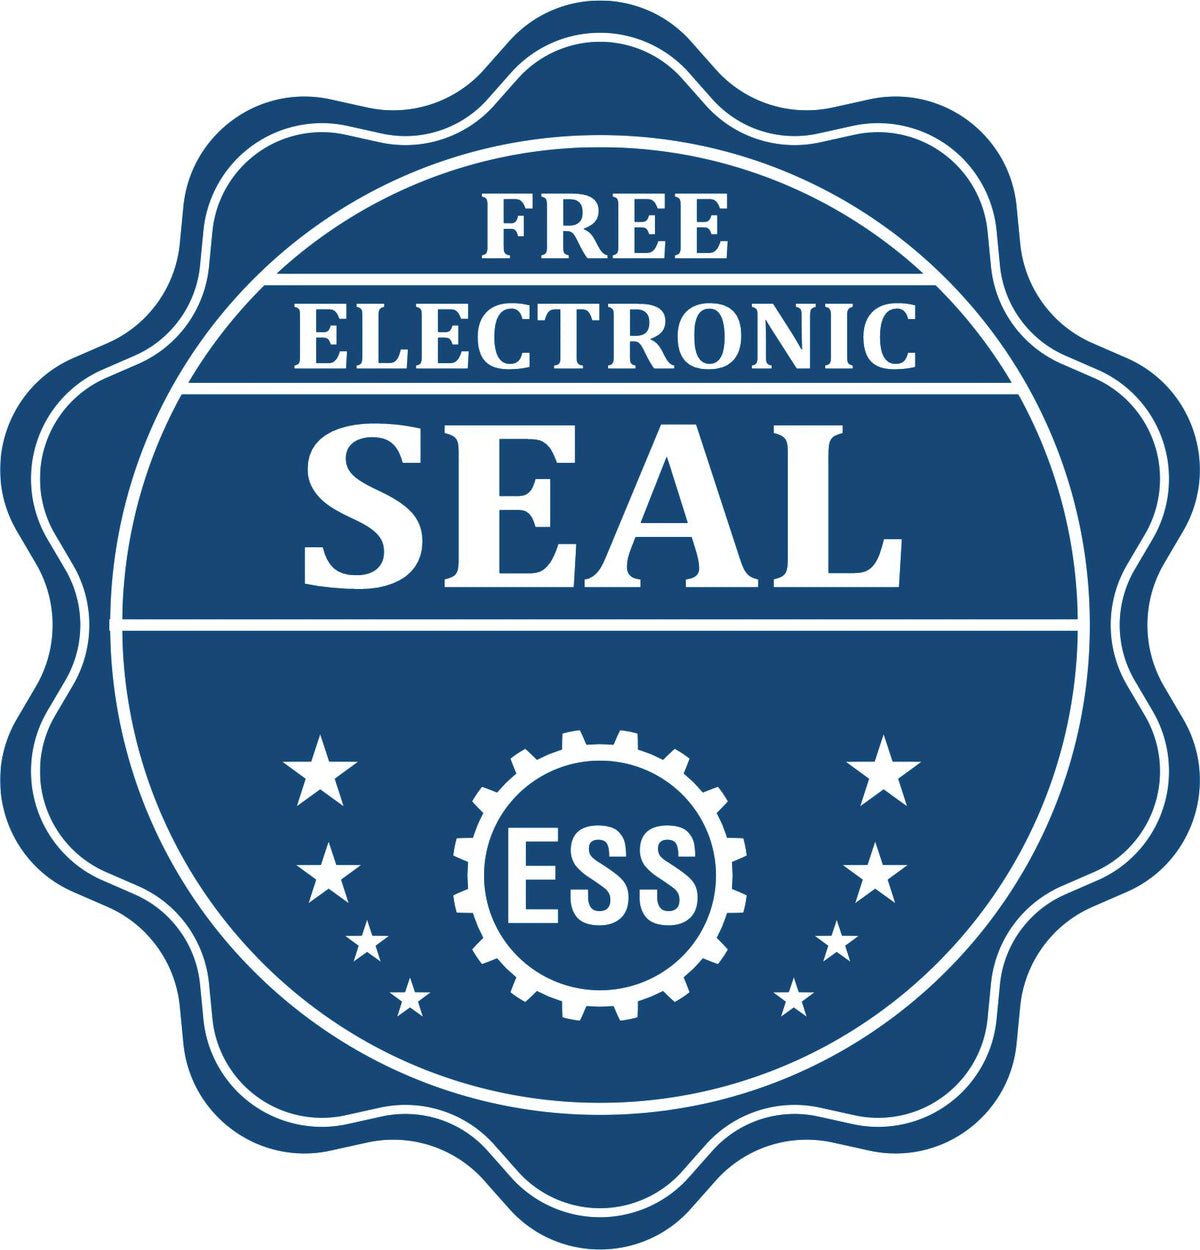 A badge showing a free electronic seal for the Gift New Hampshire Architect Seal with stars and the ESS gear on the emblem.